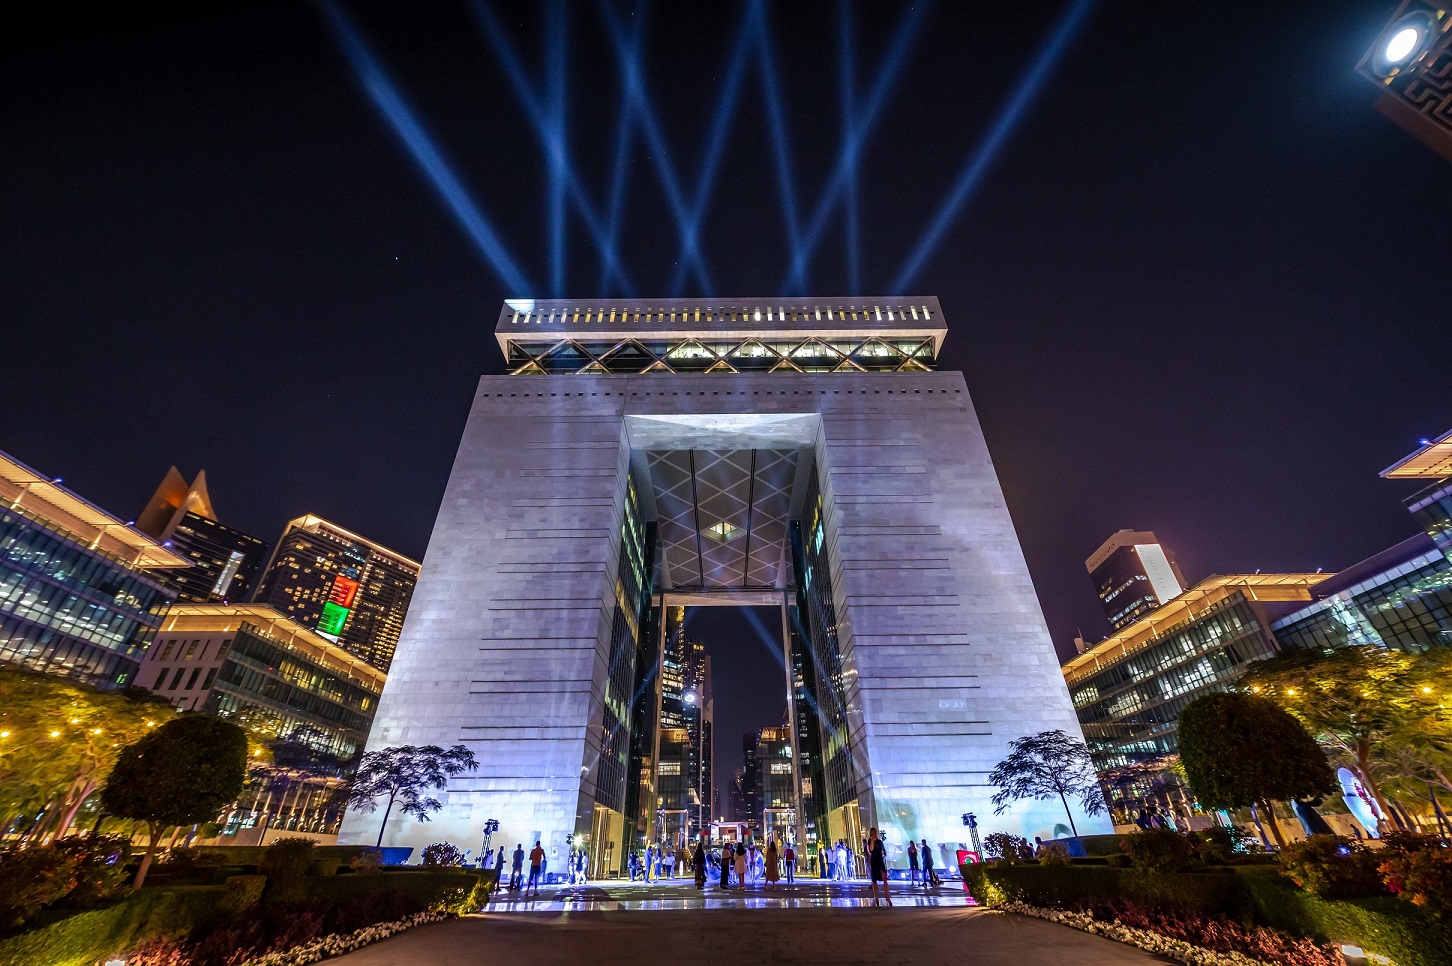 DIFC transforms into first-of-its-kind open-air Sculpture Park